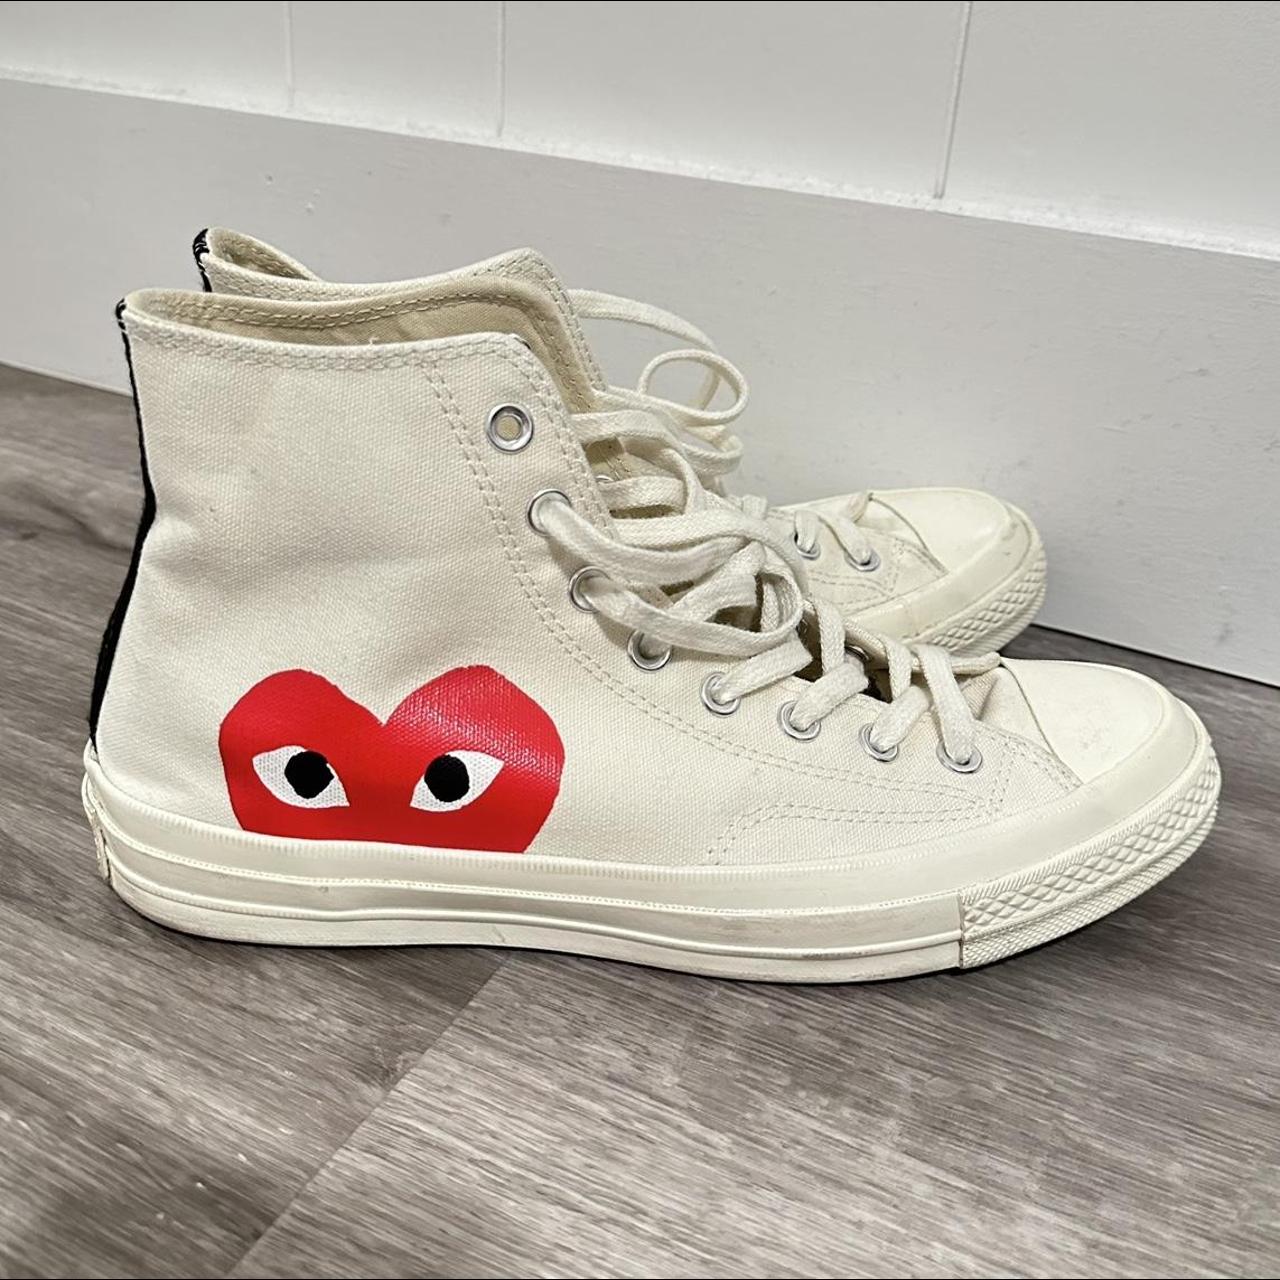 Comme des Garçons Play Men's White and Red Trainers